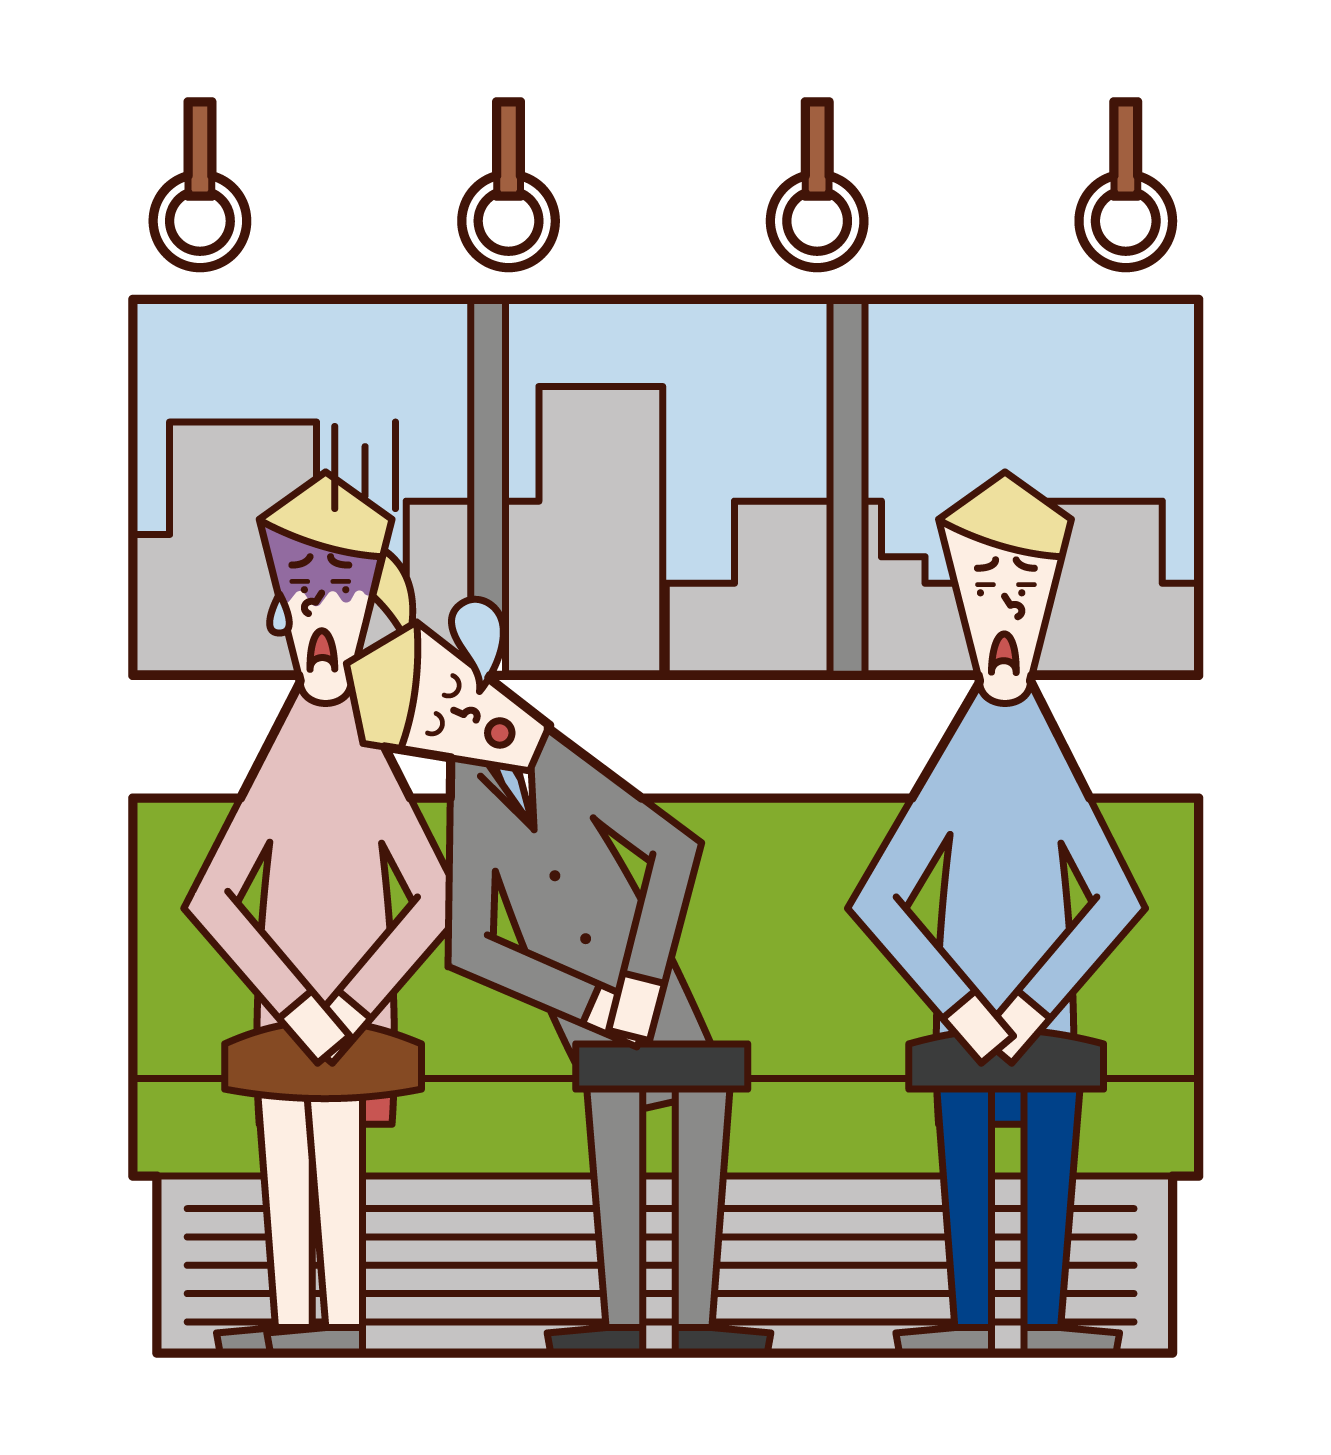 Illustration of a man sleeping while leaning on the person next to him on the train